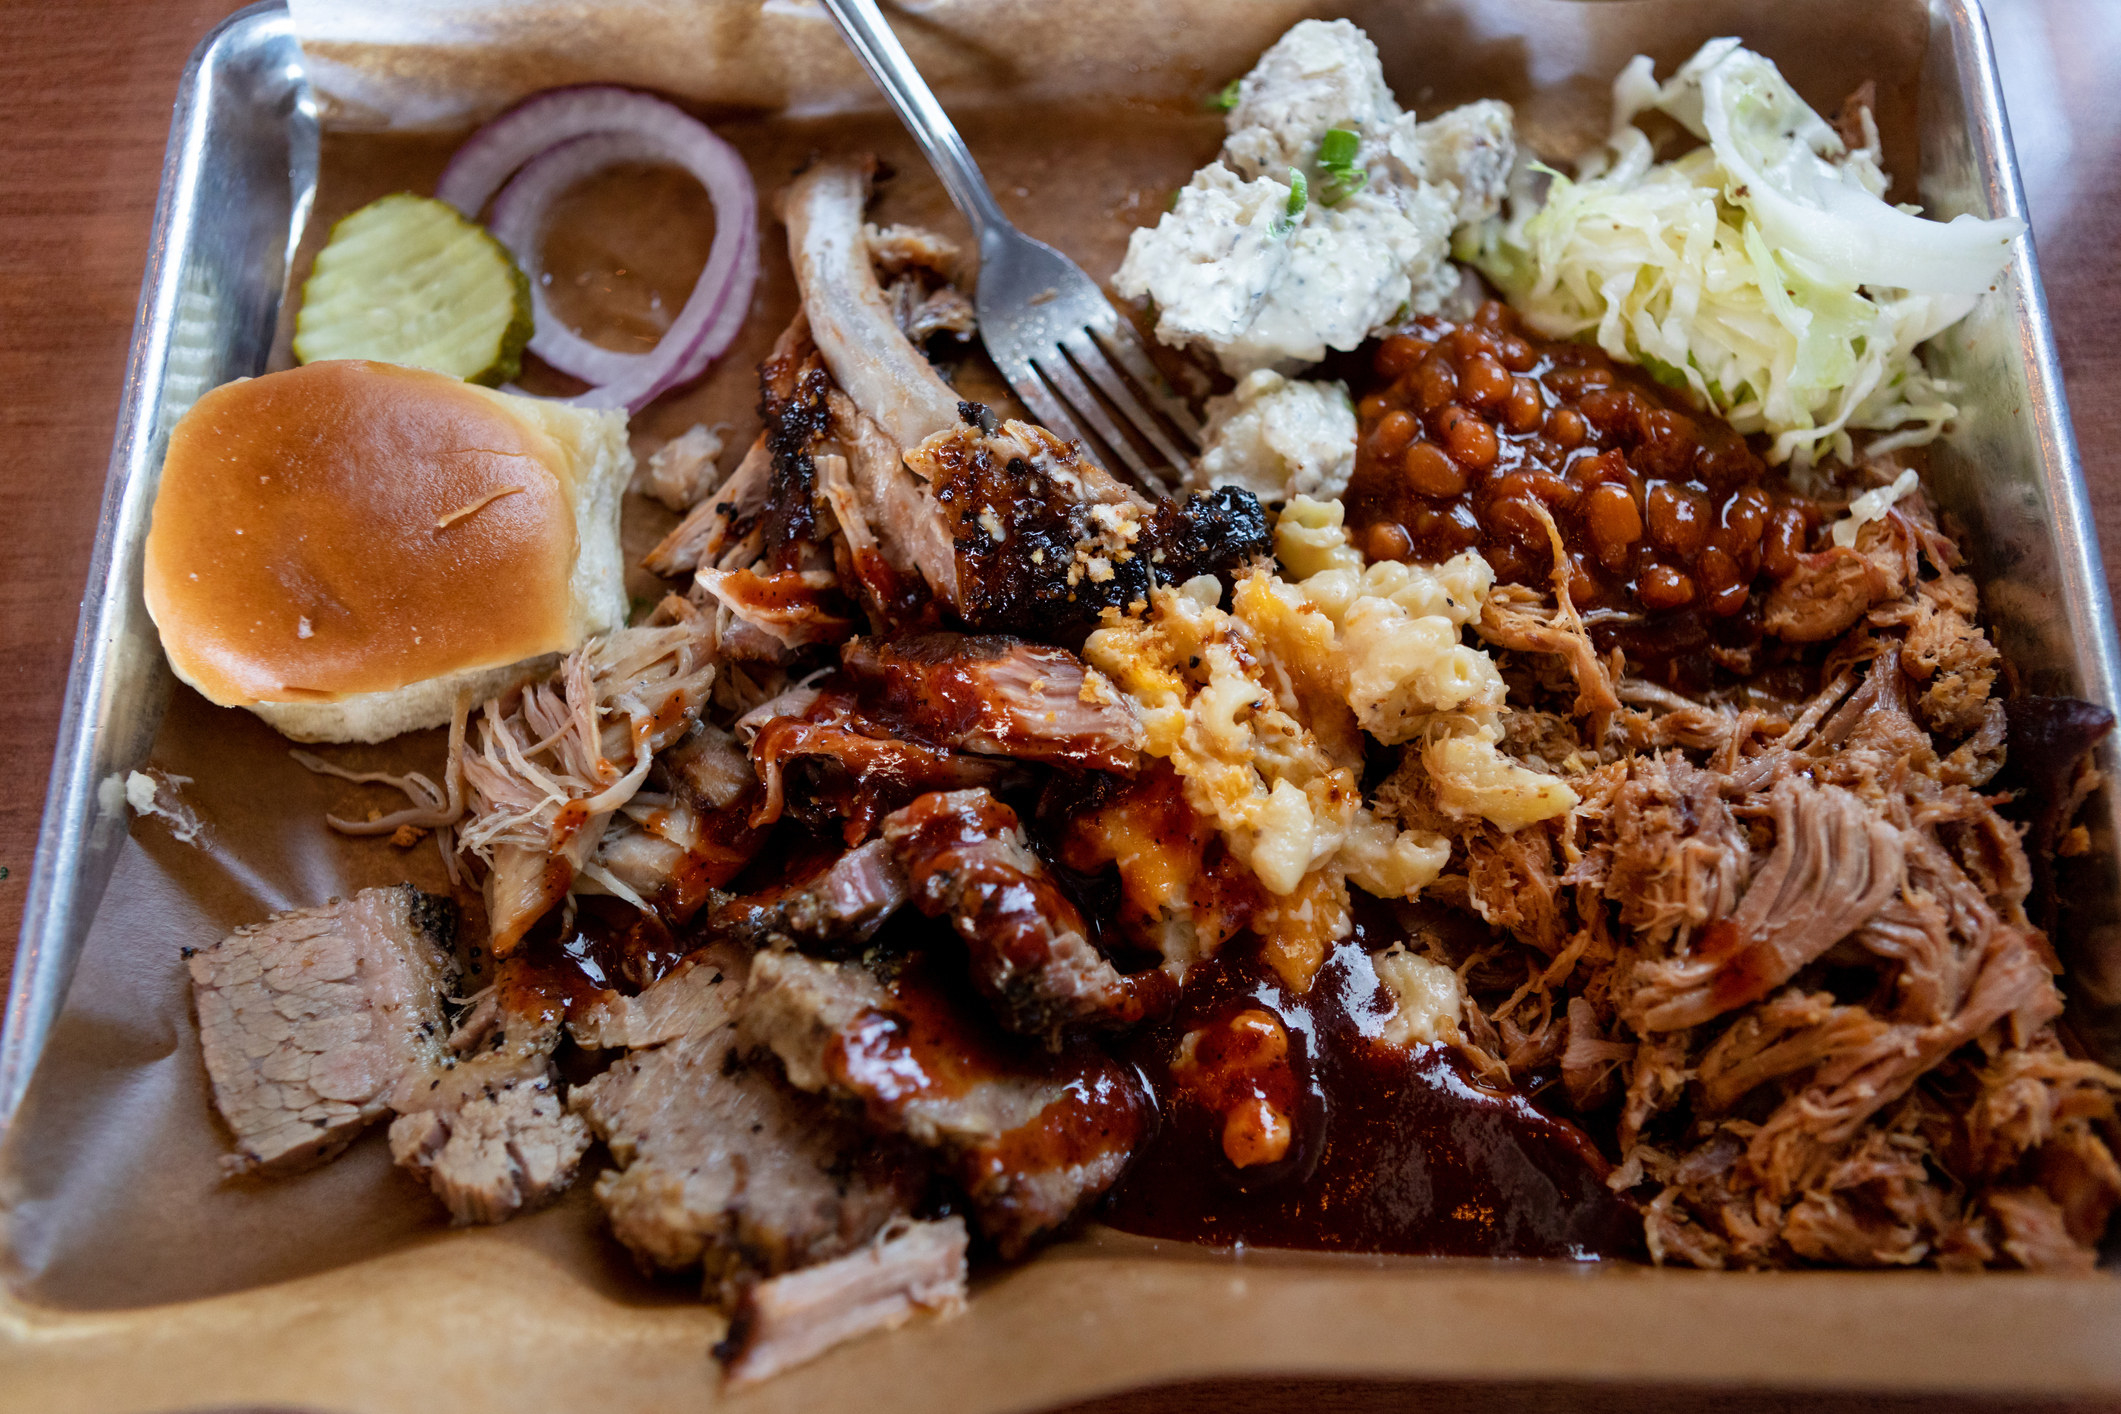 A big plate of barbecue